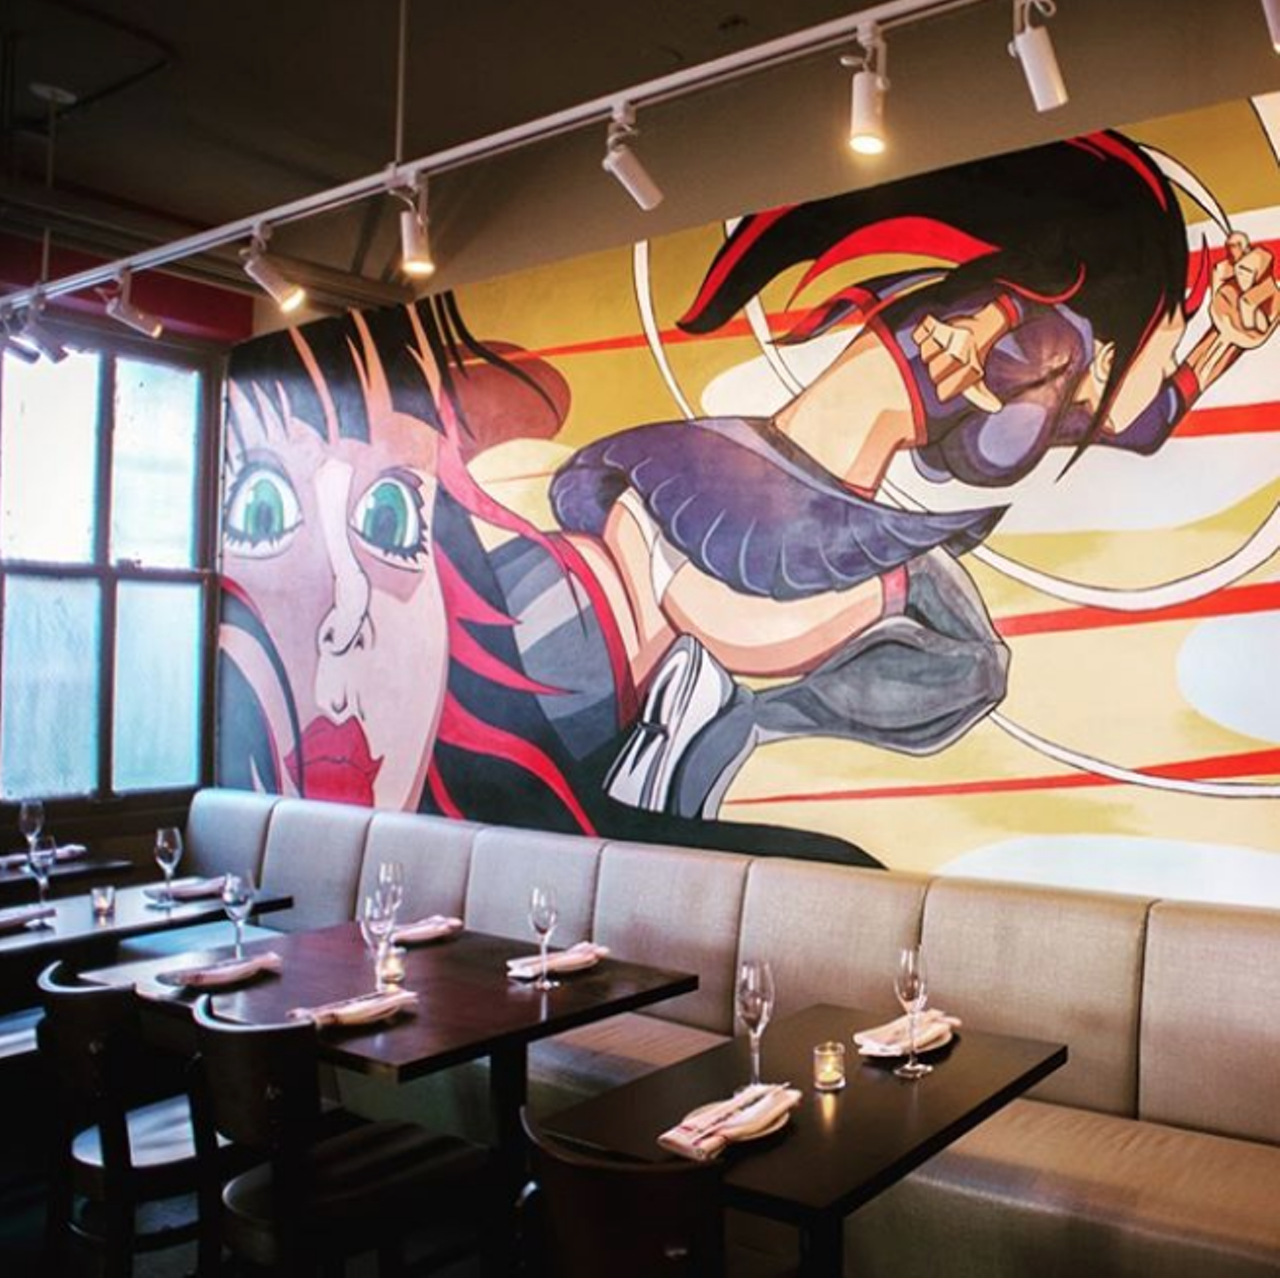 Sukeban
1420 S Alamo St, facebook.com/sukebansushi
With an aesthetic solidified by Japanese graffiti, this trendy spot is go-to for sushi and champagne. On the wine list you’ll find solid options for when you just want a damn drink..
Photo via Instagram / sukebansushi